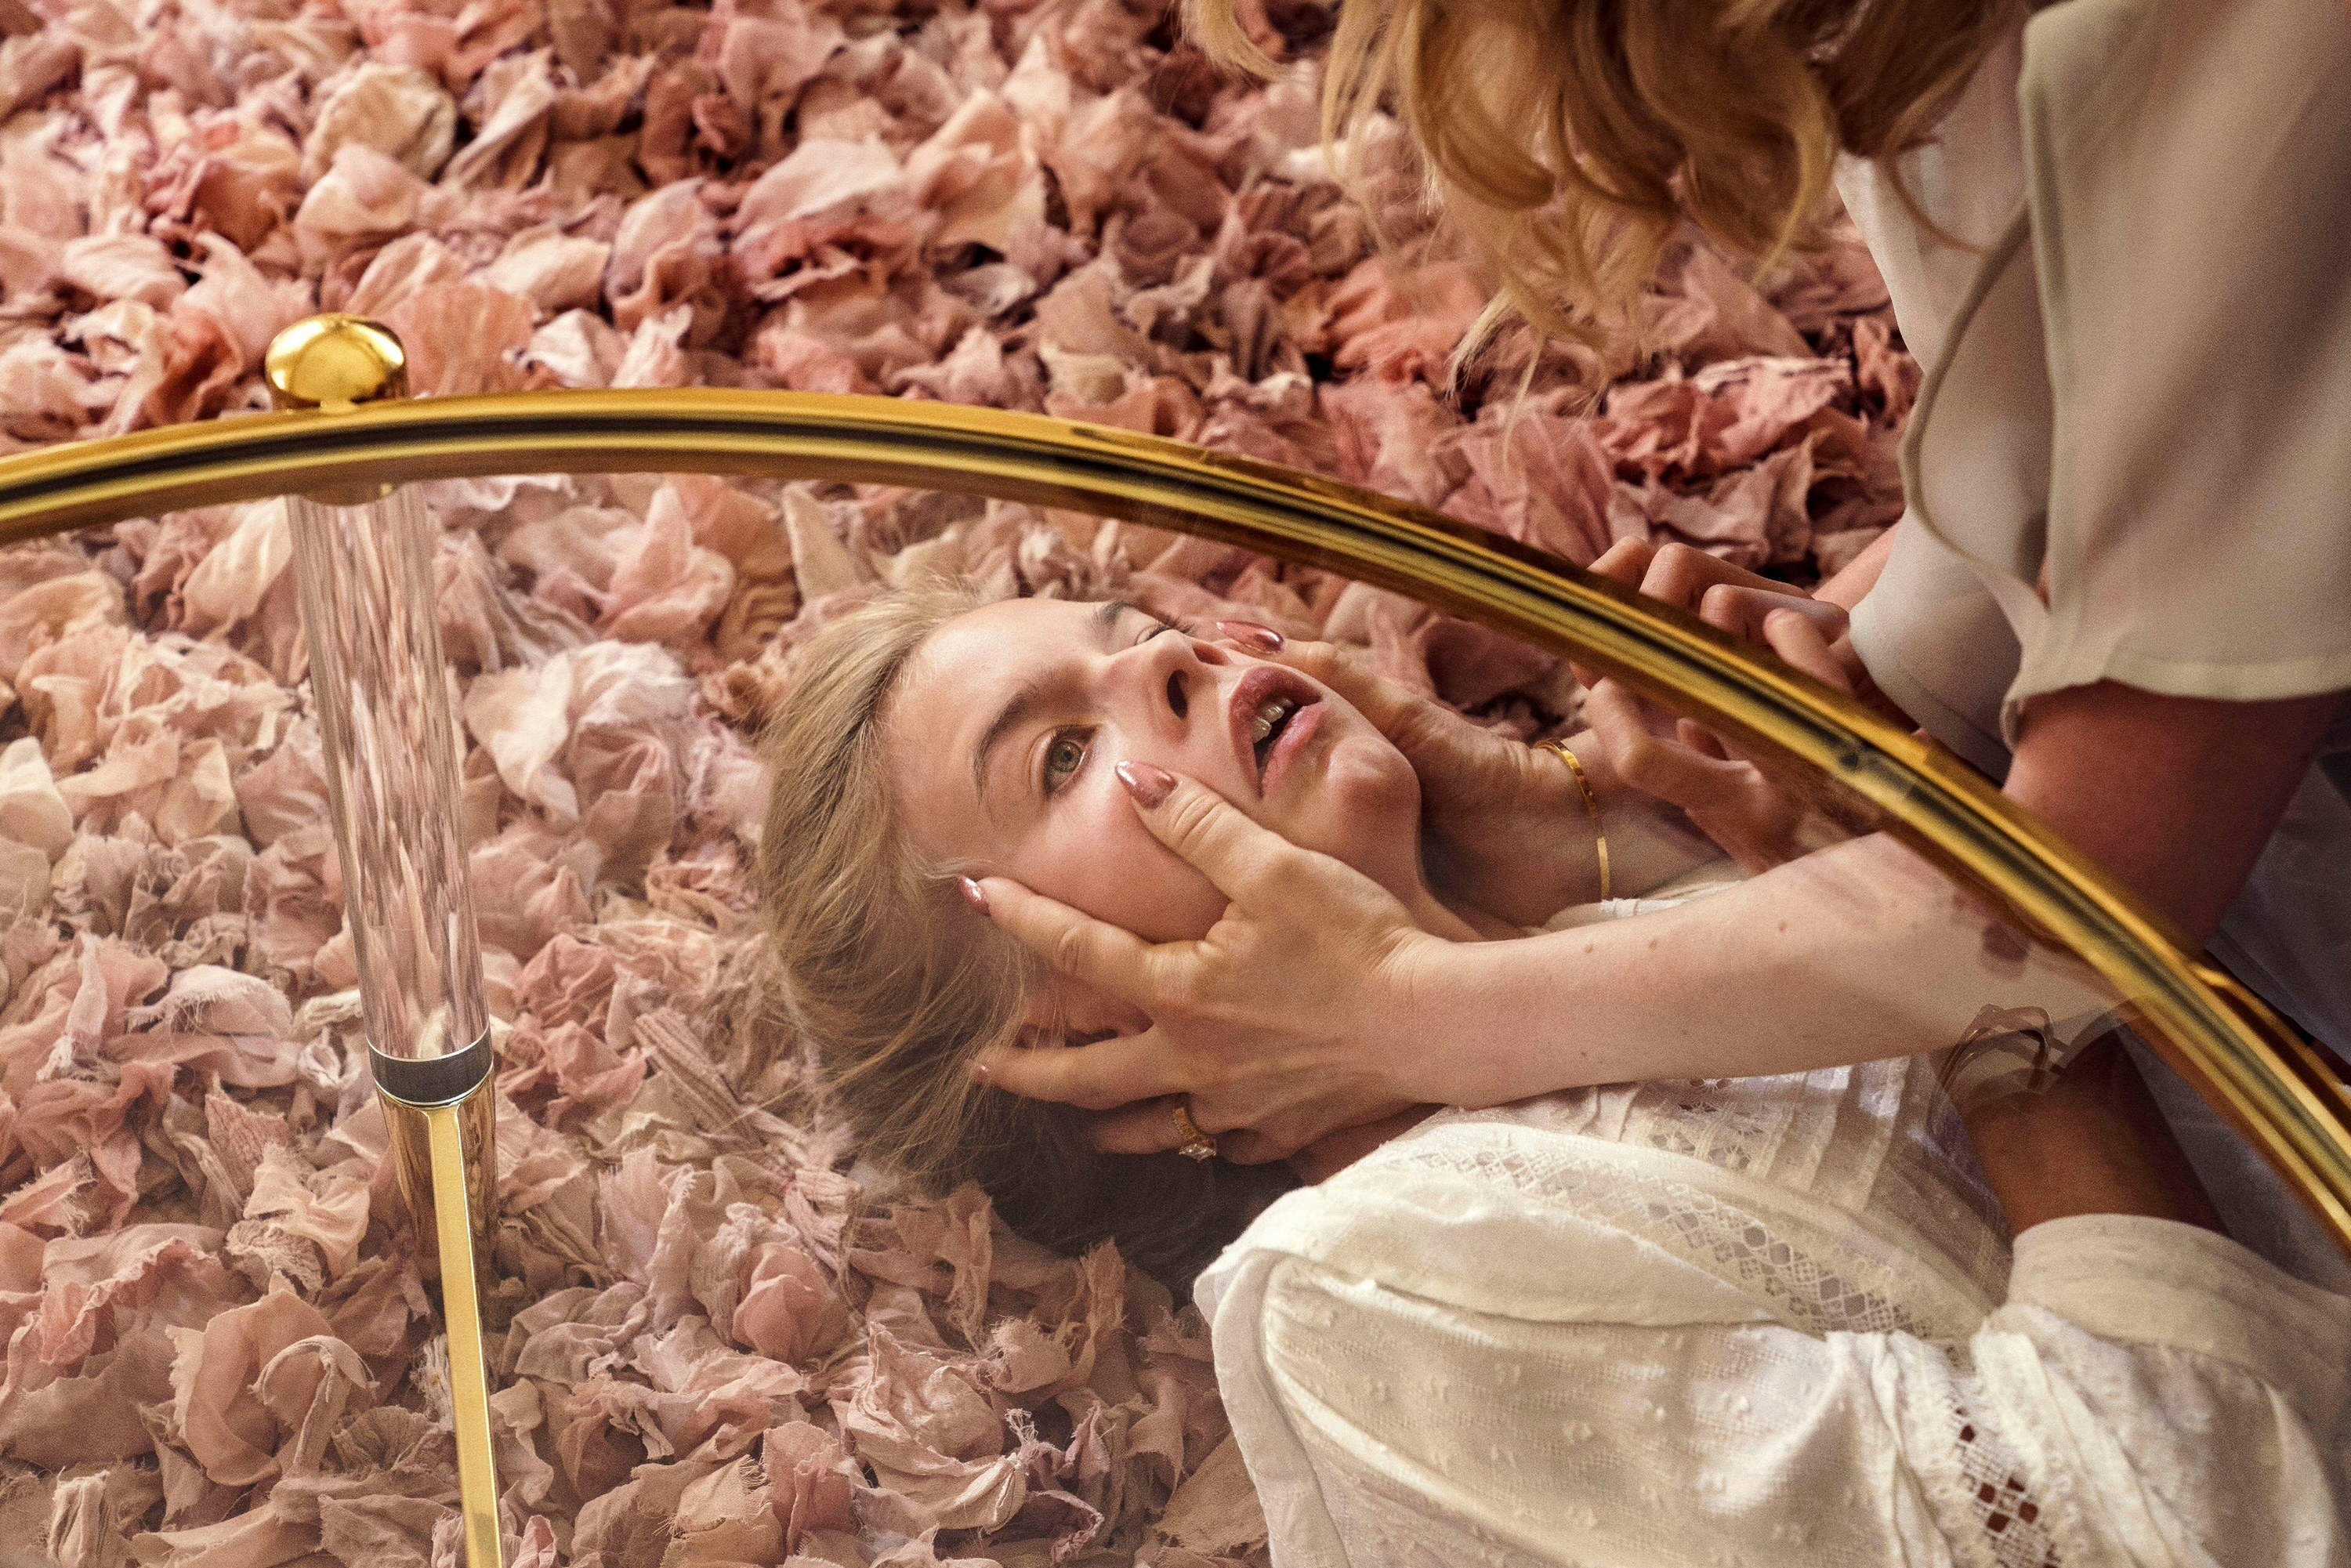 A young woman is attacked by a monstrous doppelganger on a pink carpet in “Hatching”